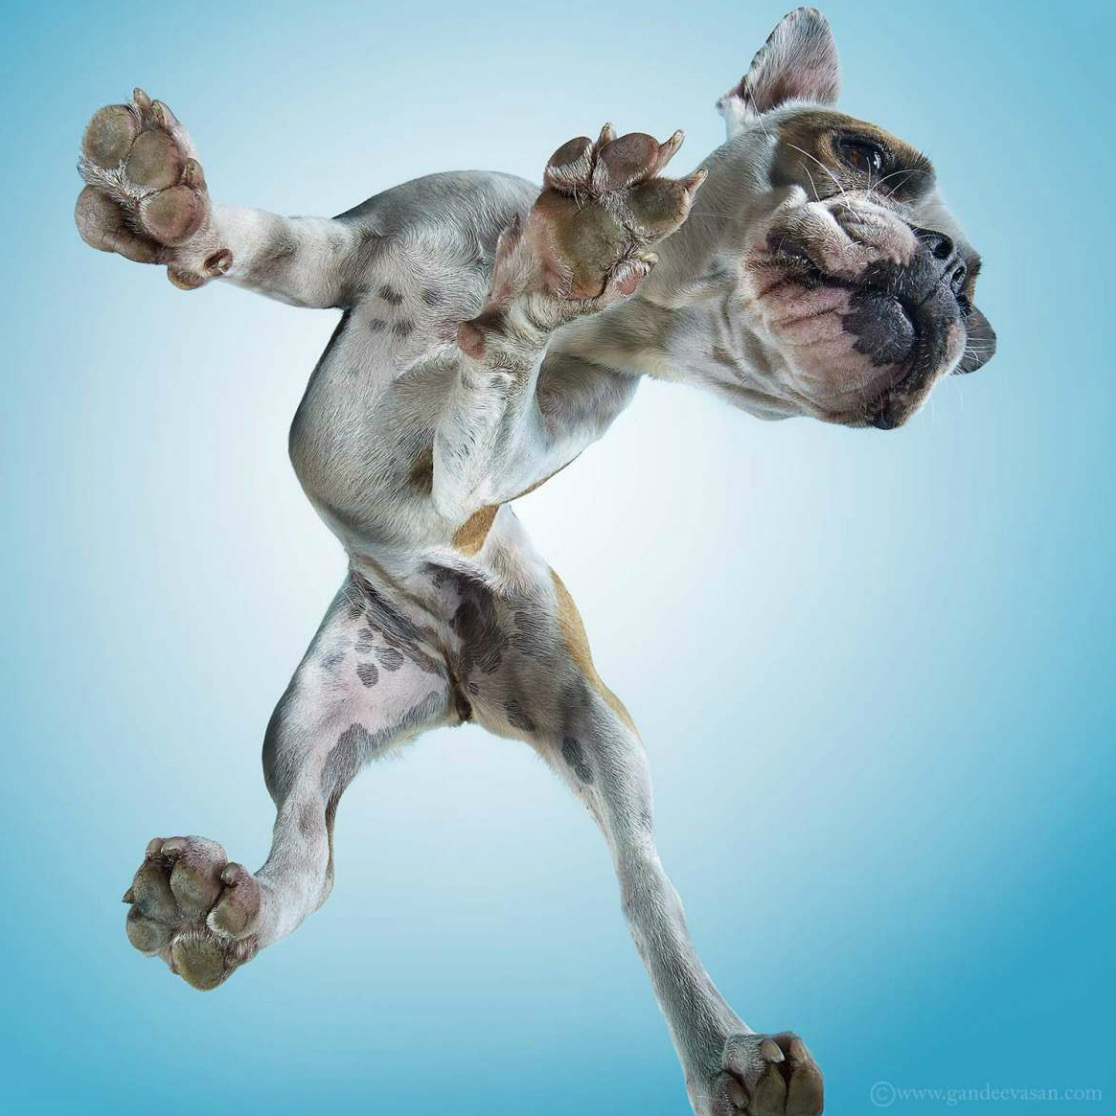 French Bulldog moving as if he is dancing Copyright Gandee Vasan